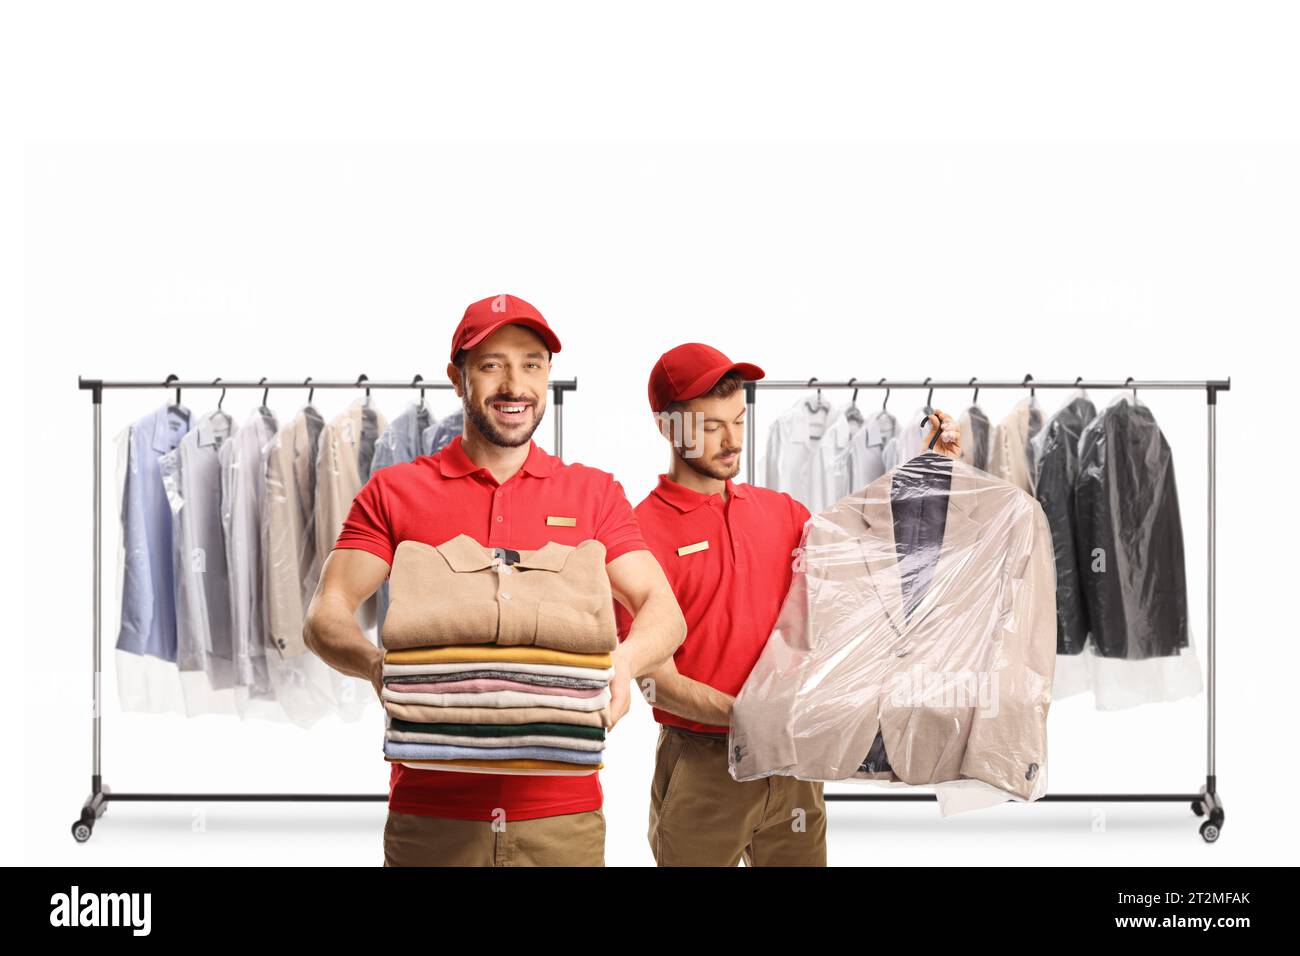 https://c8.alamy.com/comp/2T2MFAK/dry-cleaning-workers-with-a-pile-of-folded-clothes-and-a-suit-on-a-hanger-isolated-on-a-white-background-2T2MFAK.jpg